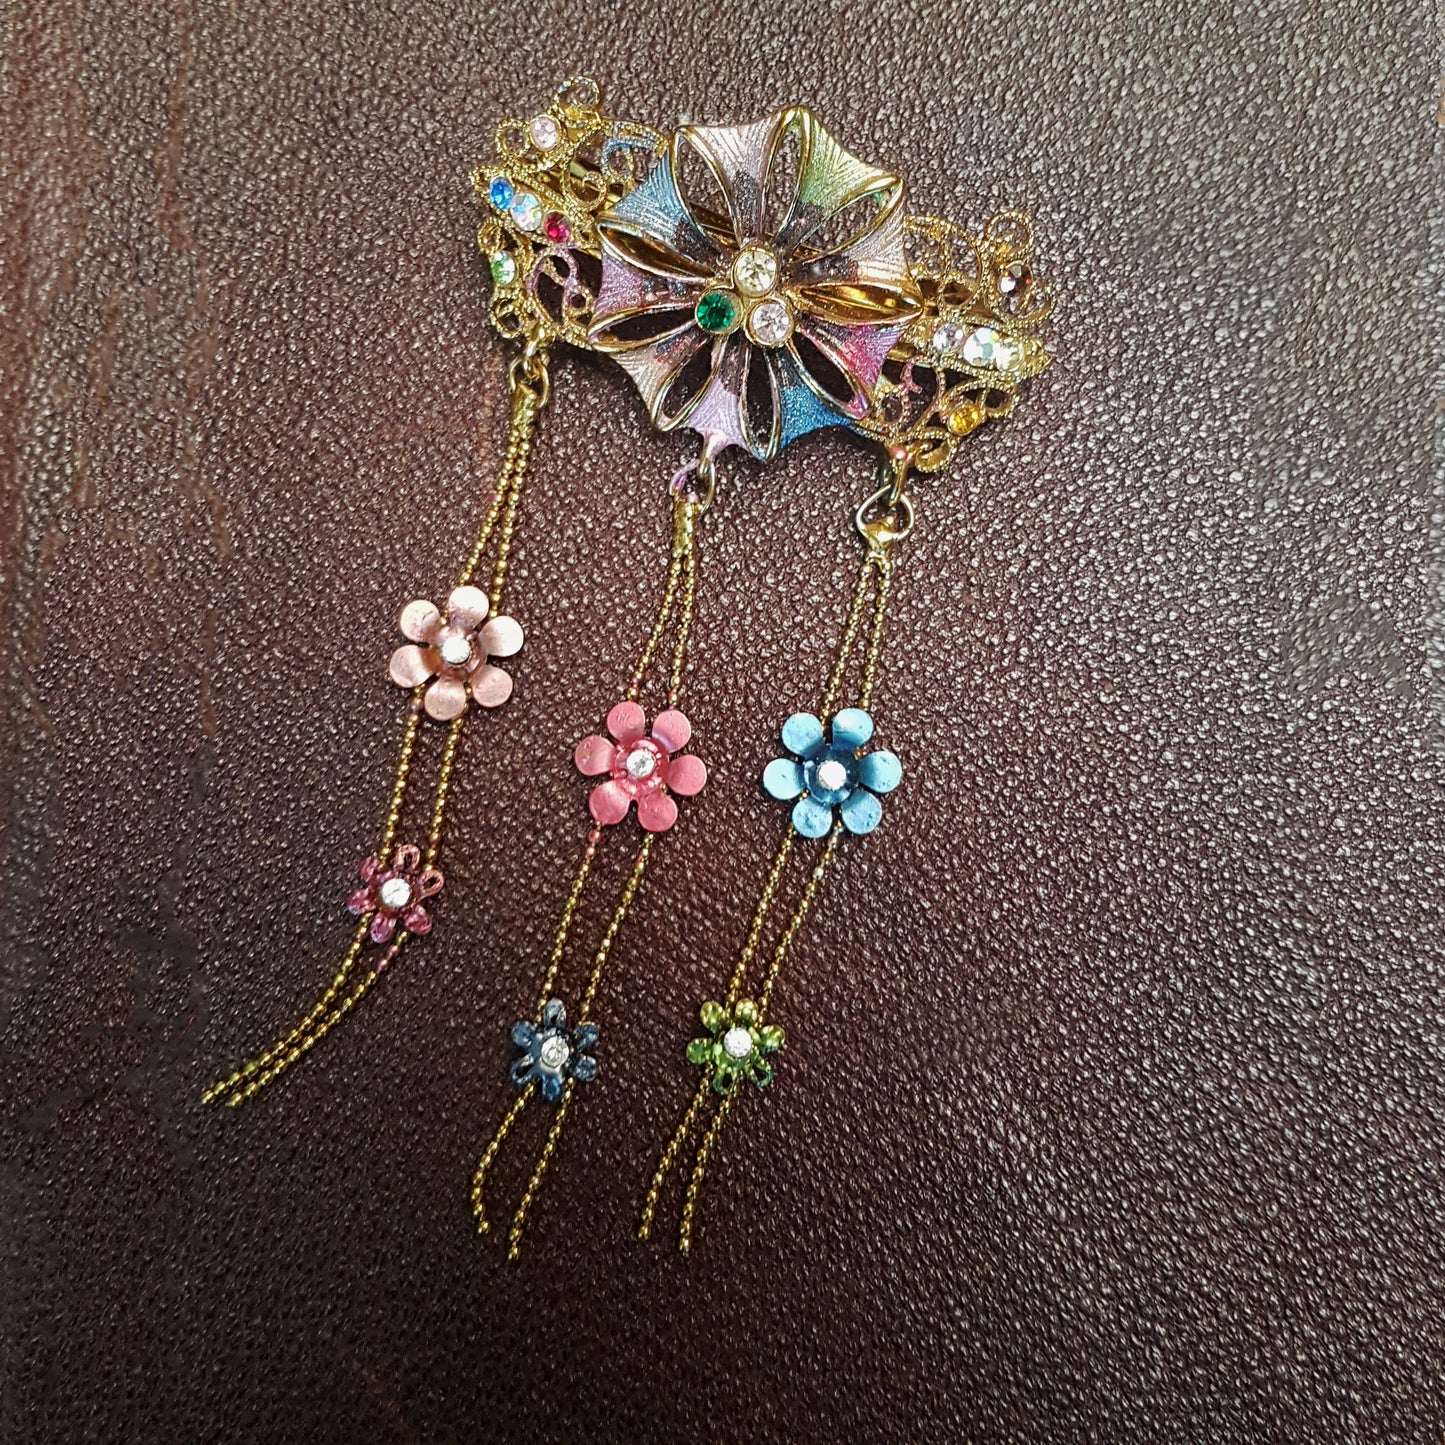 Vintage hairclip barette in a  medieval flower design. Hair jewelry with rhinestones in soft rose and blue tones.  Gold metal details.